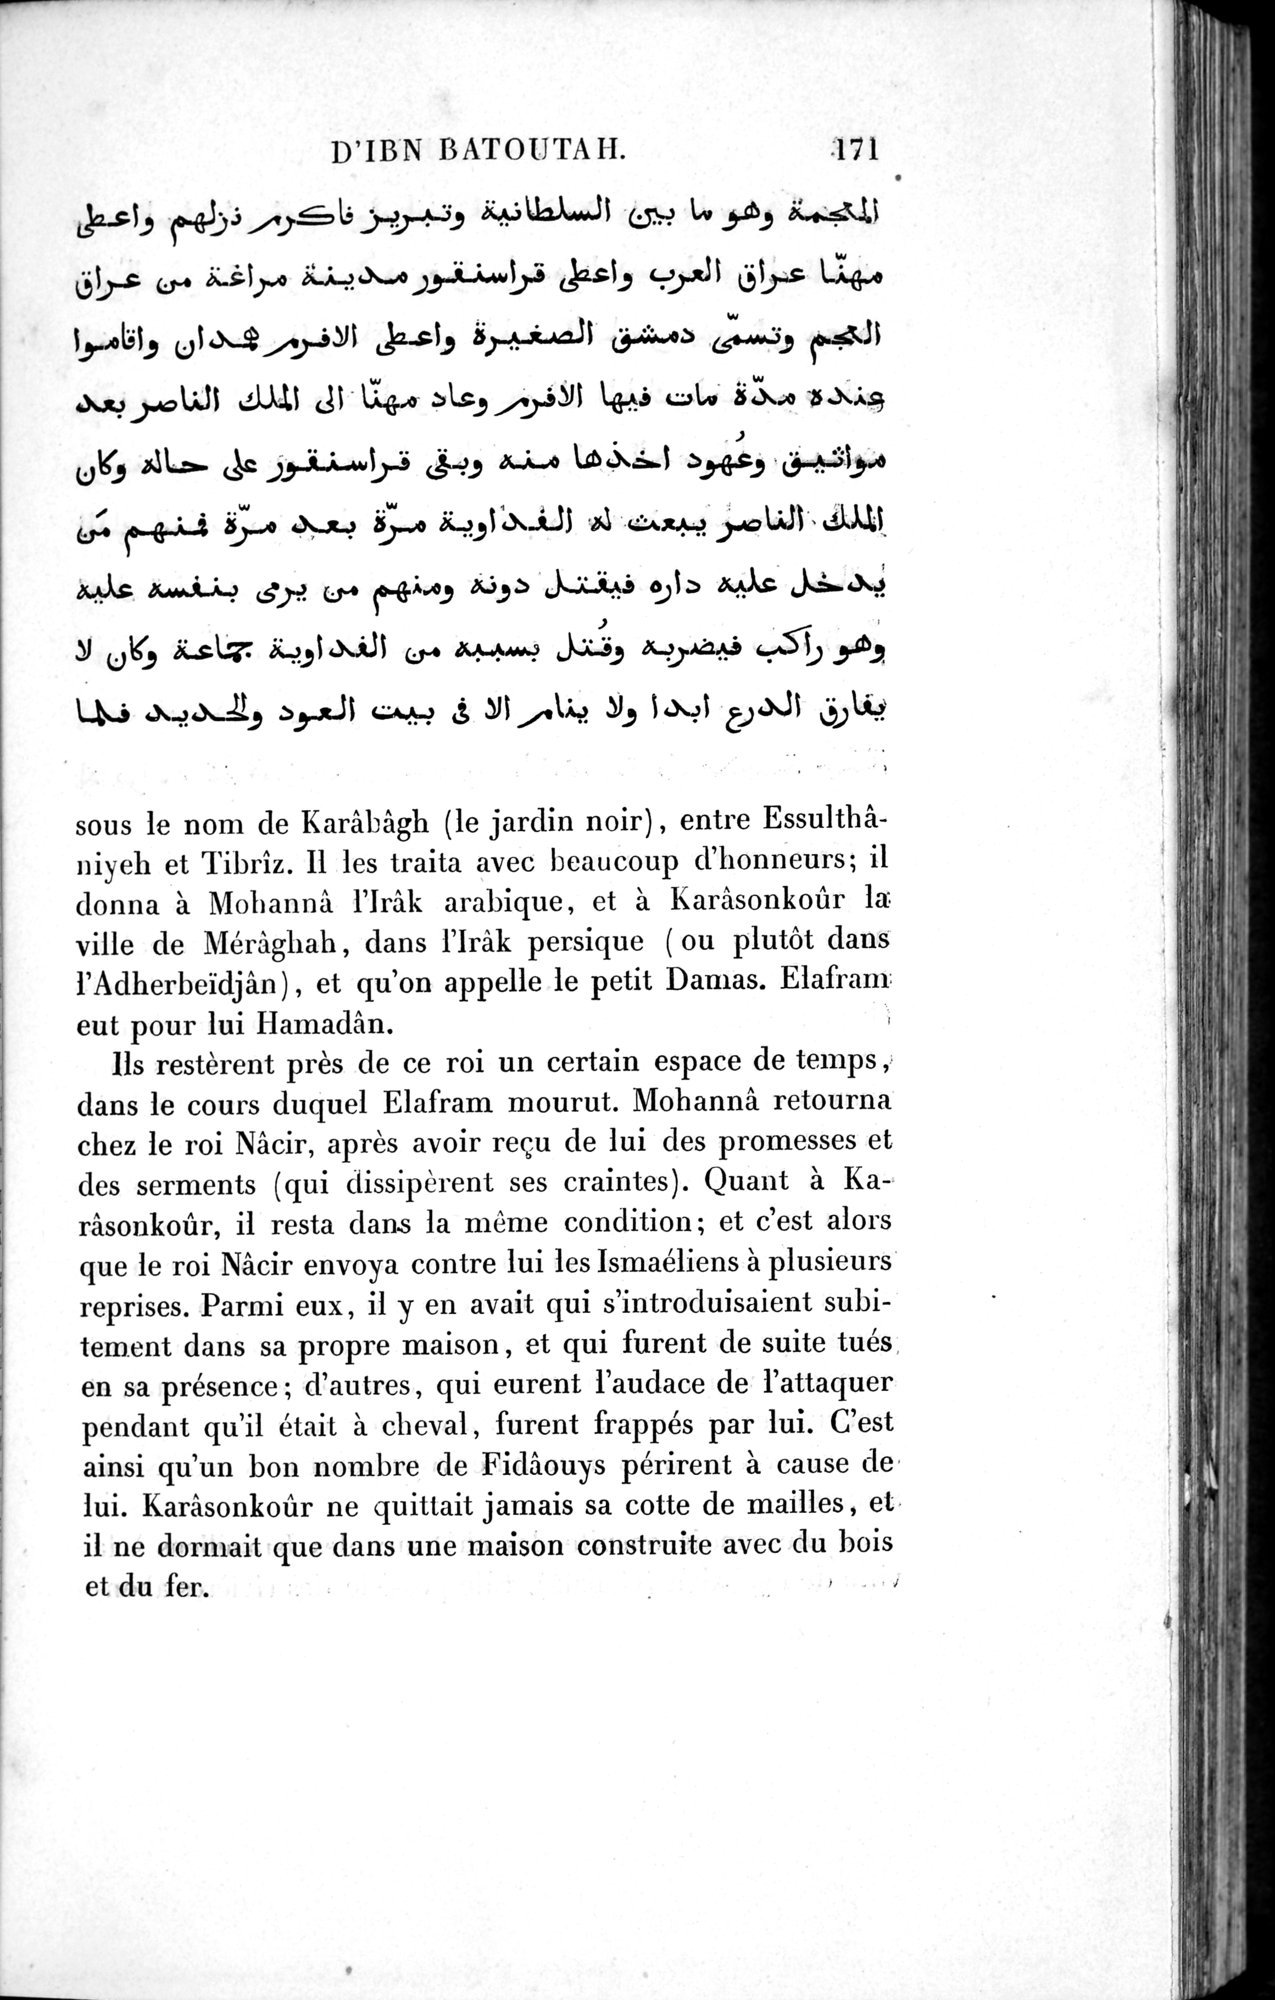 Voyages d'Ibn Batoutah : vol.1 / Page 231 (Grayscale High Resolution Image)